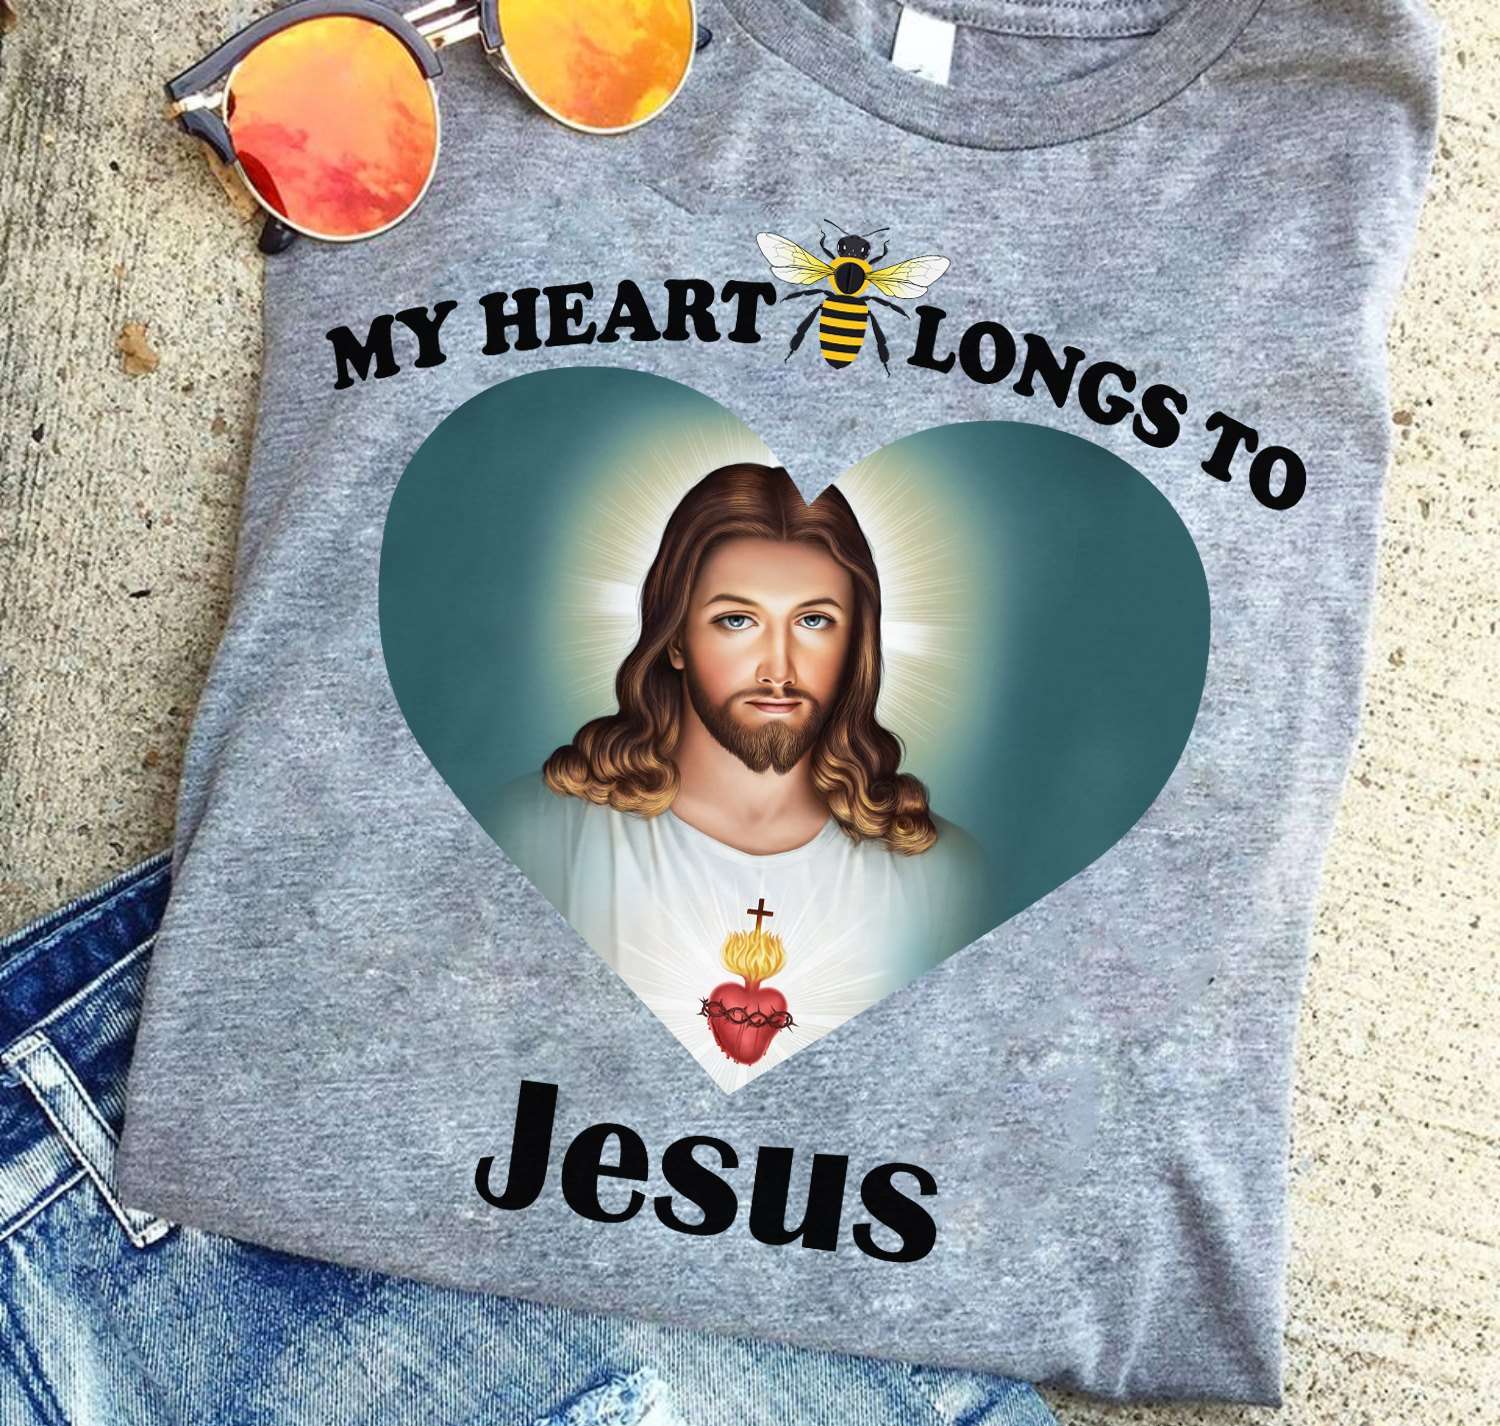 The Angel Of The Lord, Jesus Christ - My heart longs to jesus